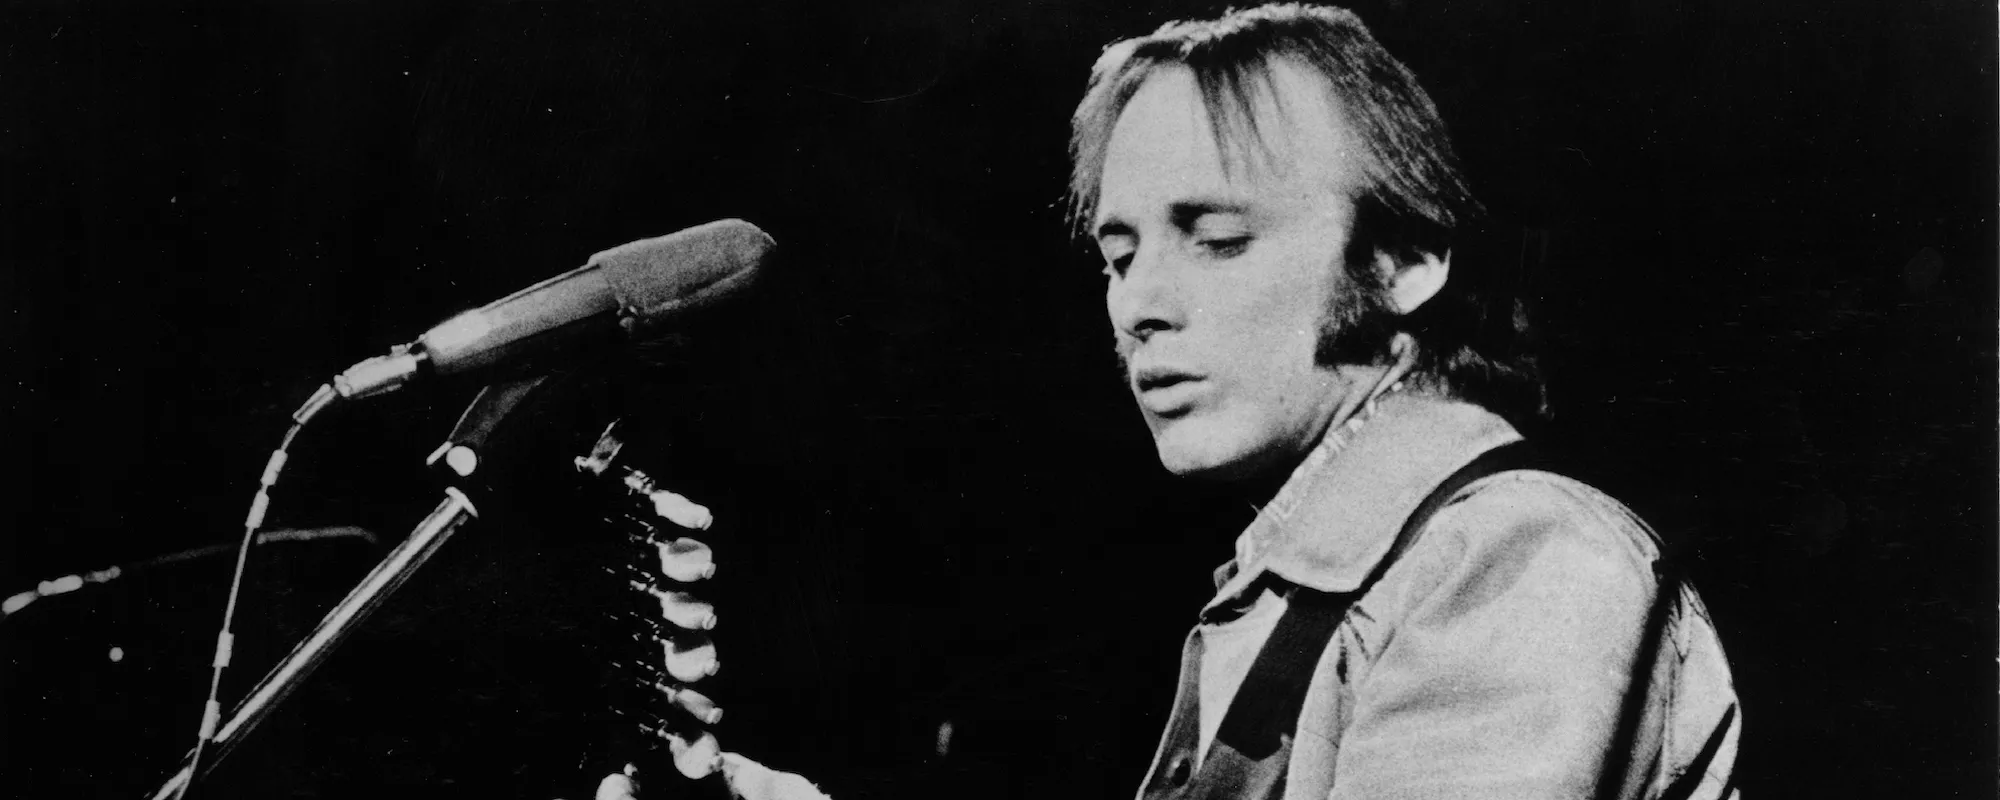 5 Crosby, Stills & Nash Songs Stephen Stills Wrote Solo From the Late ’60s Through 1980s